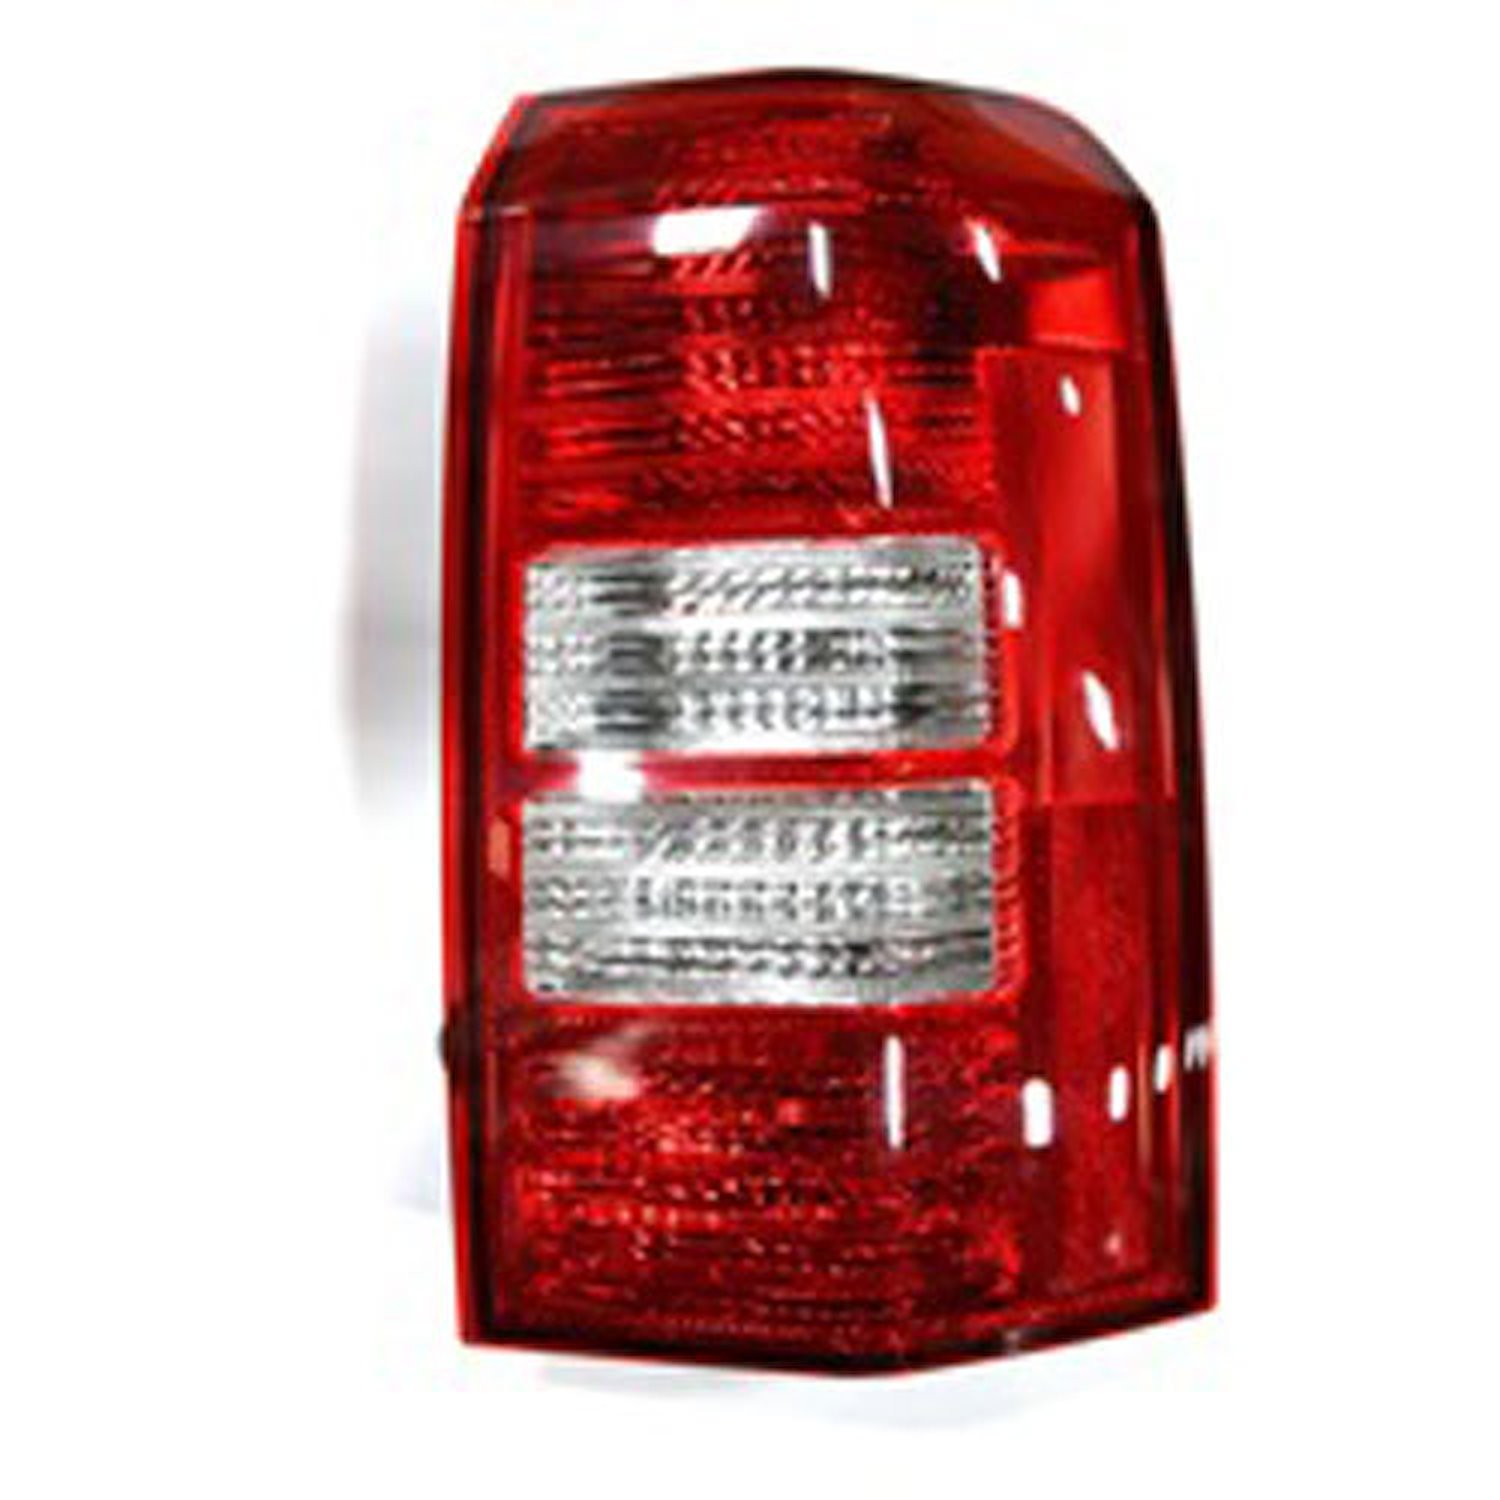 Replacement tail light from Omix-ADA, Fits right side on 08-13 Jeep Patriot